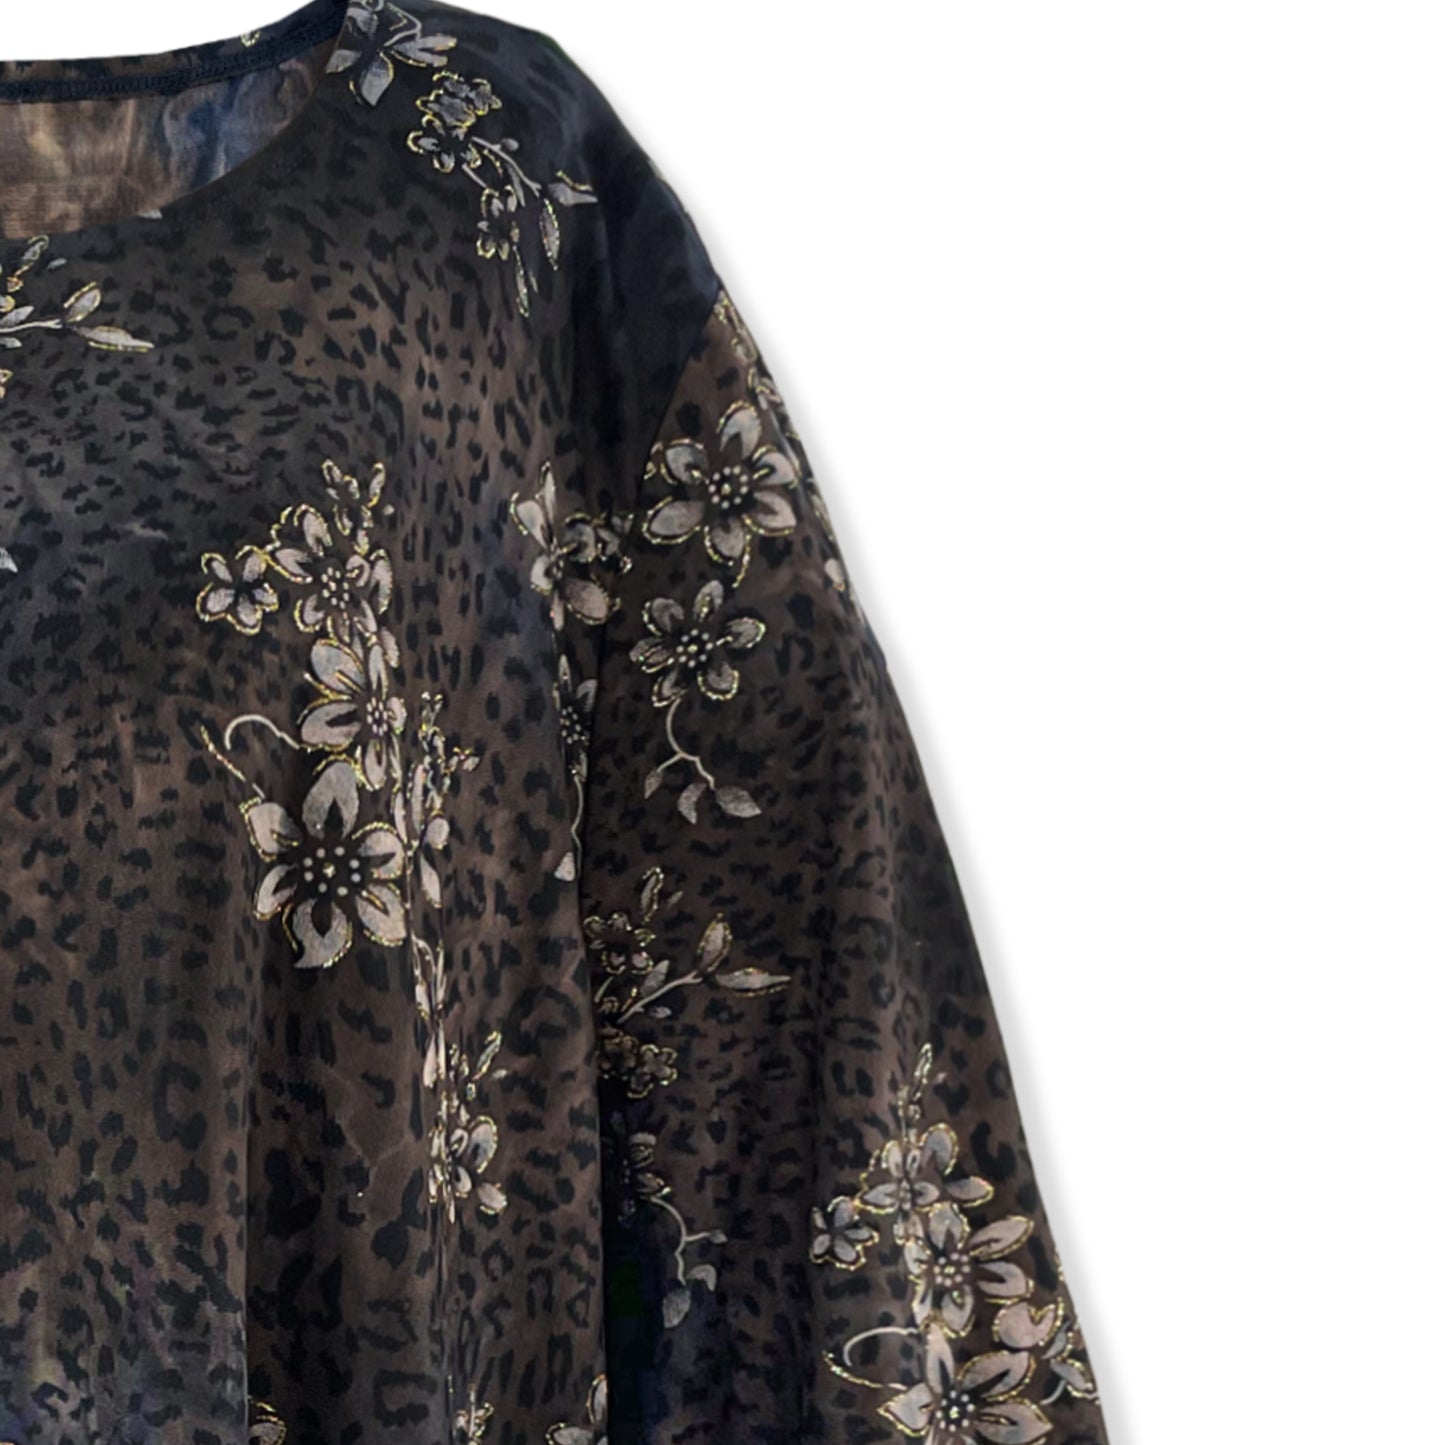 Gold Glitter Floral/Brown Navy Tunic Shirt Knit Top